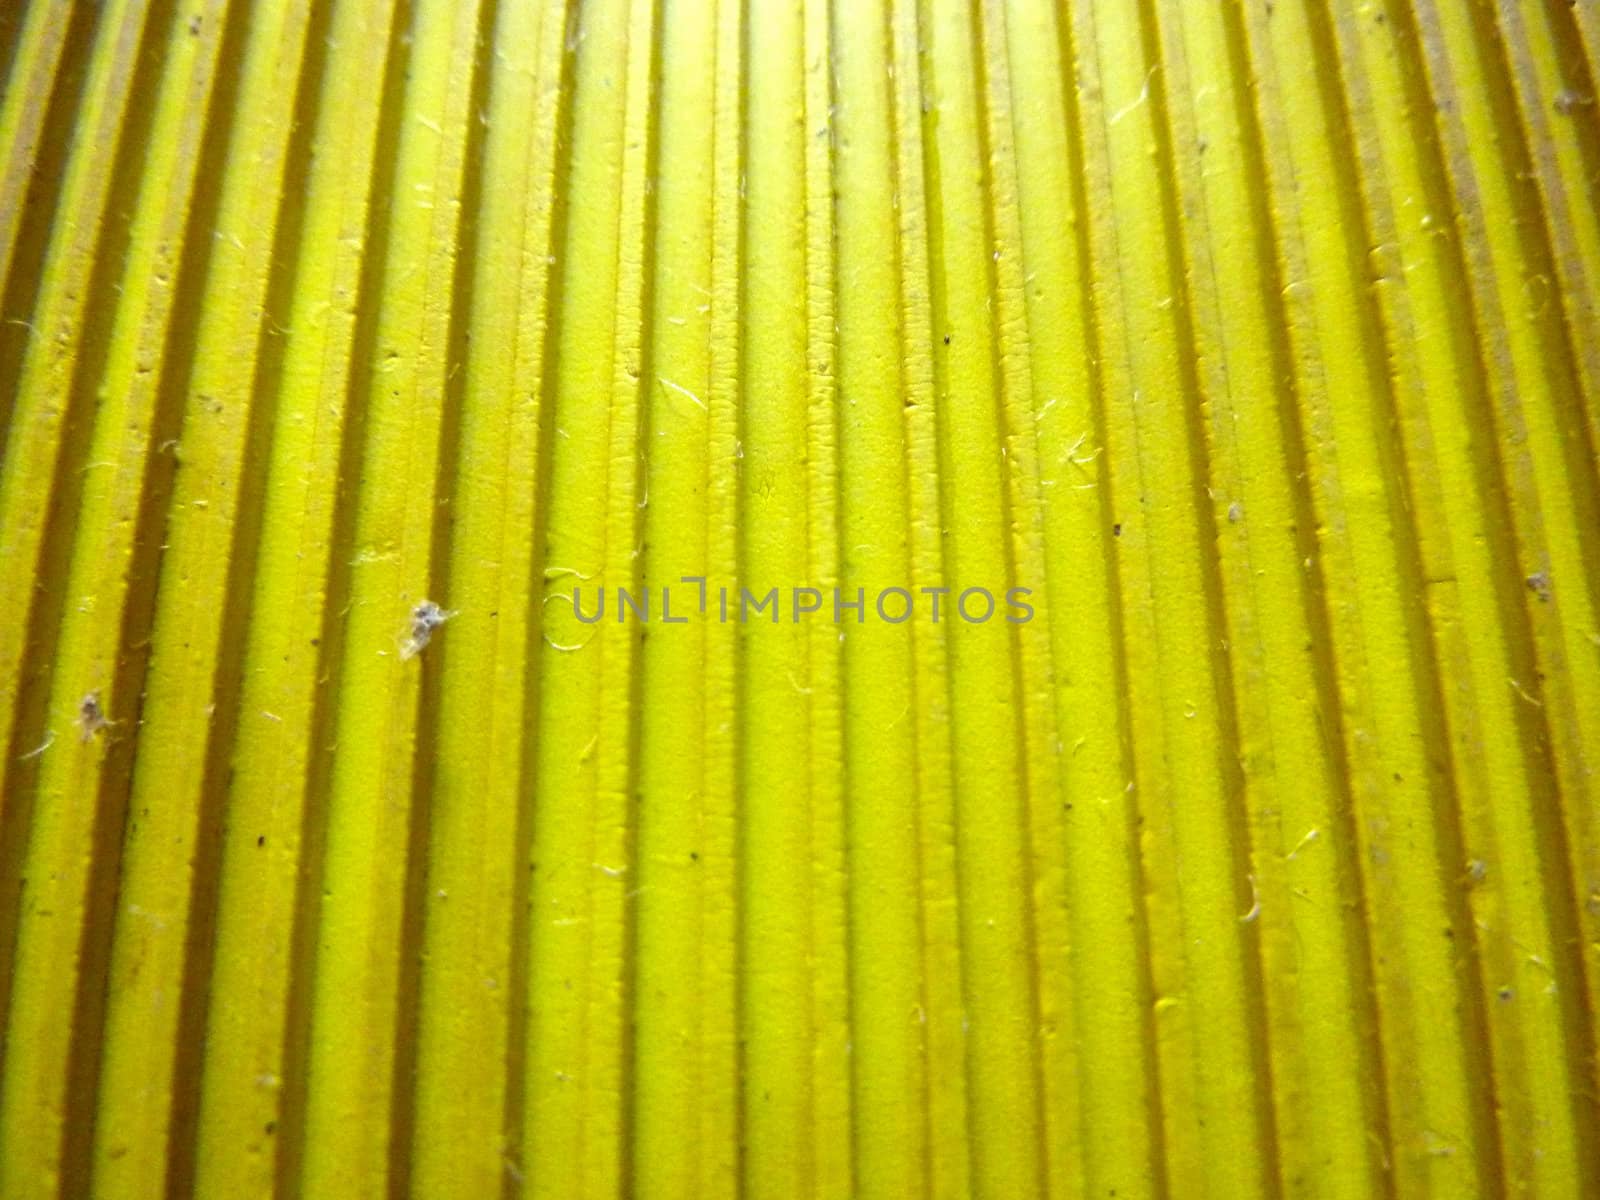 yellow striped rubber as a background